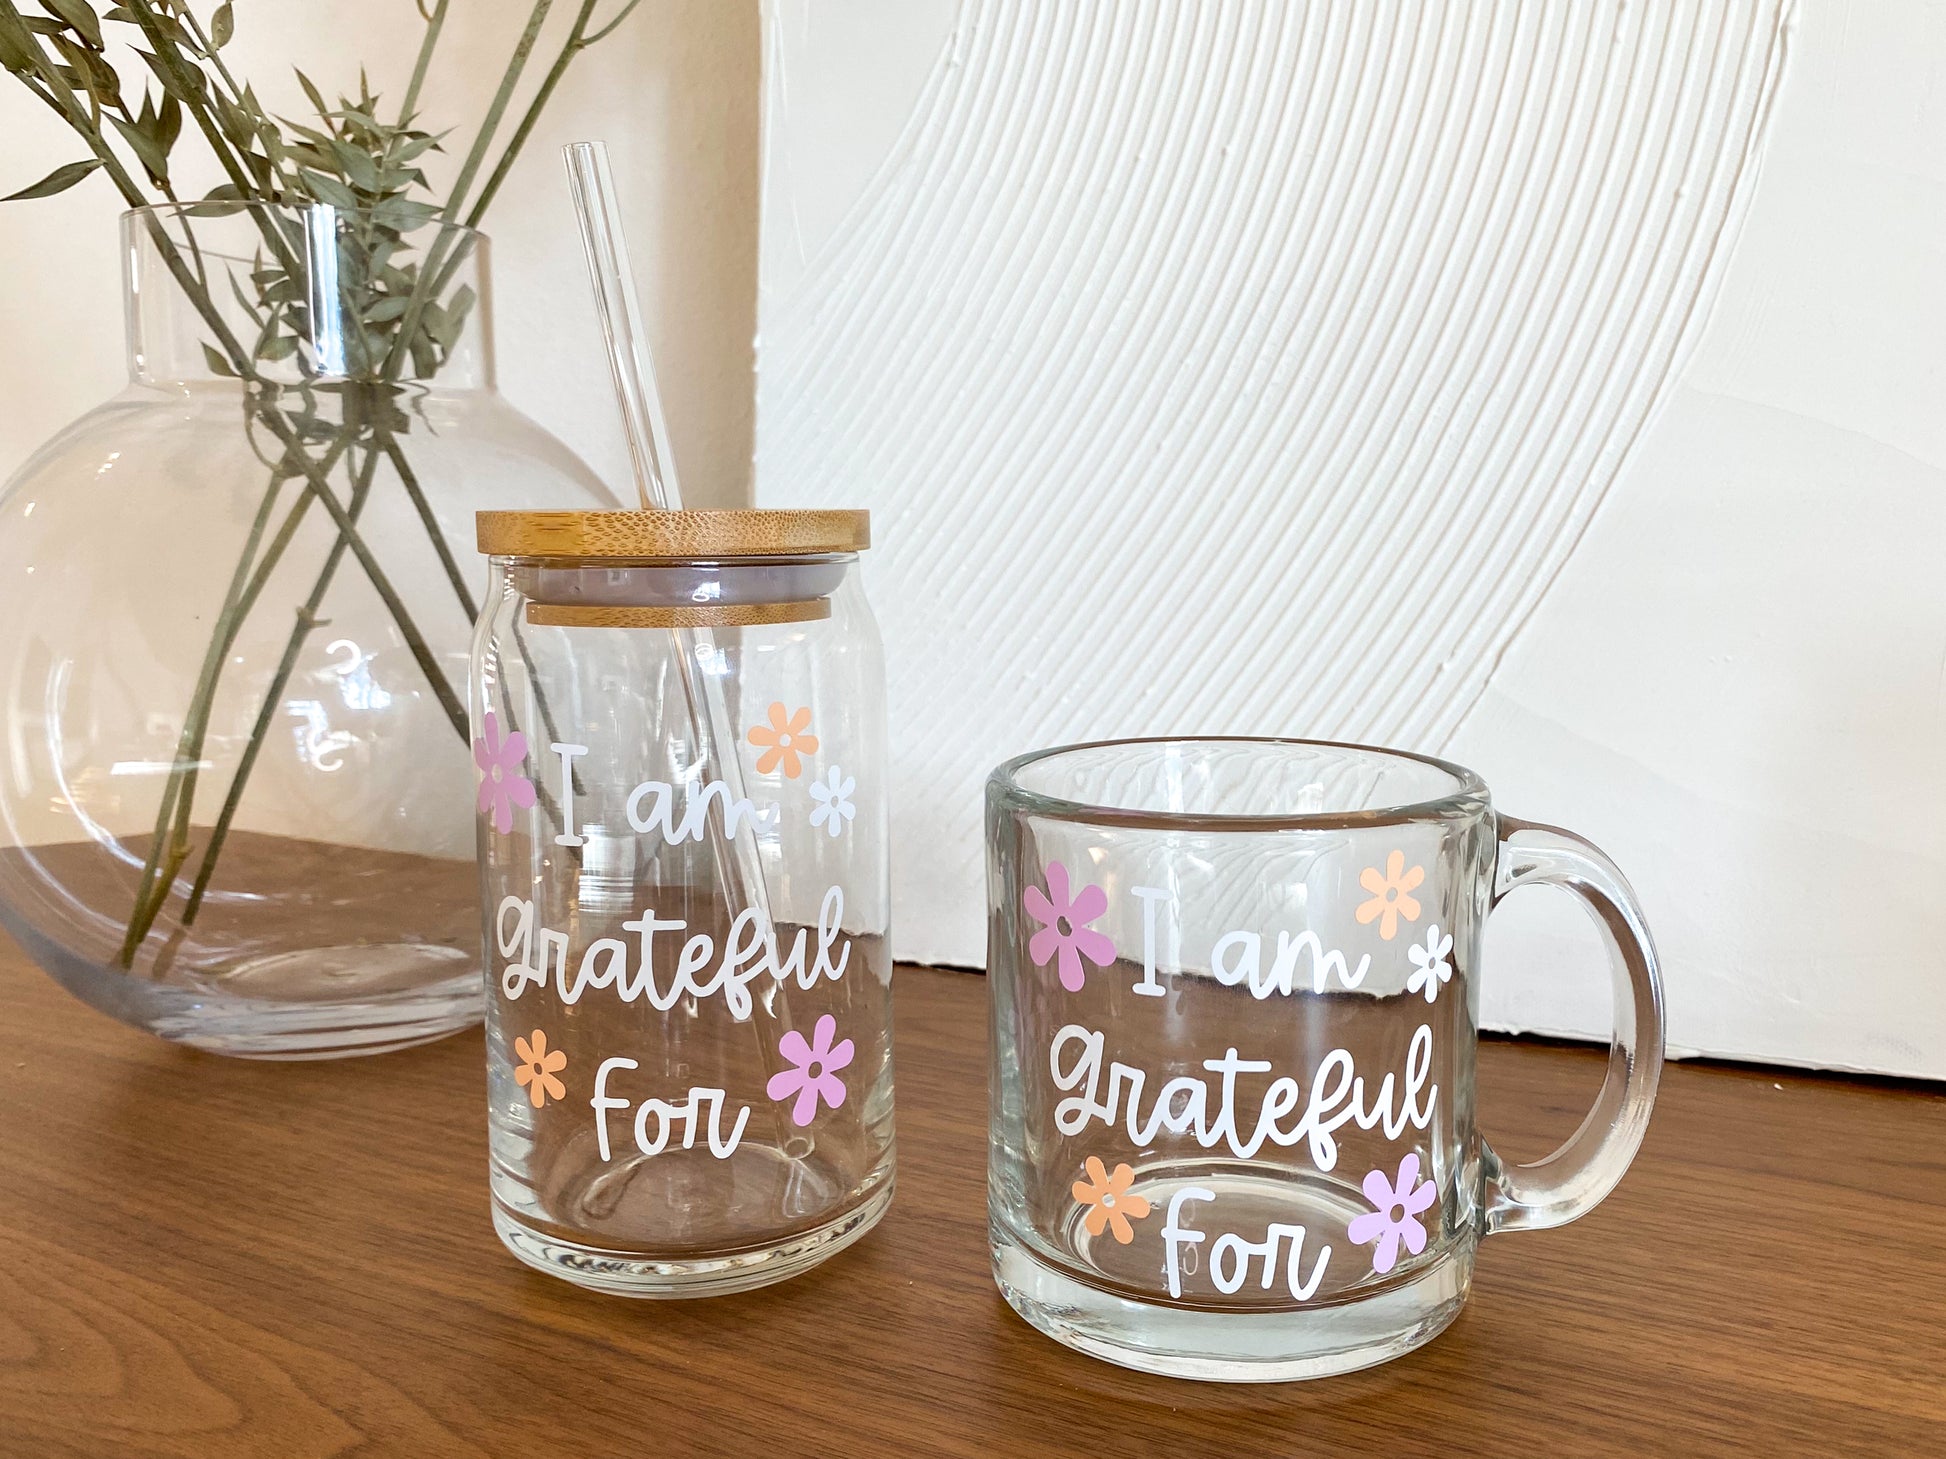 Personalized Crystal Clear Glass Coffee Mugs. Mother's Day Gifts